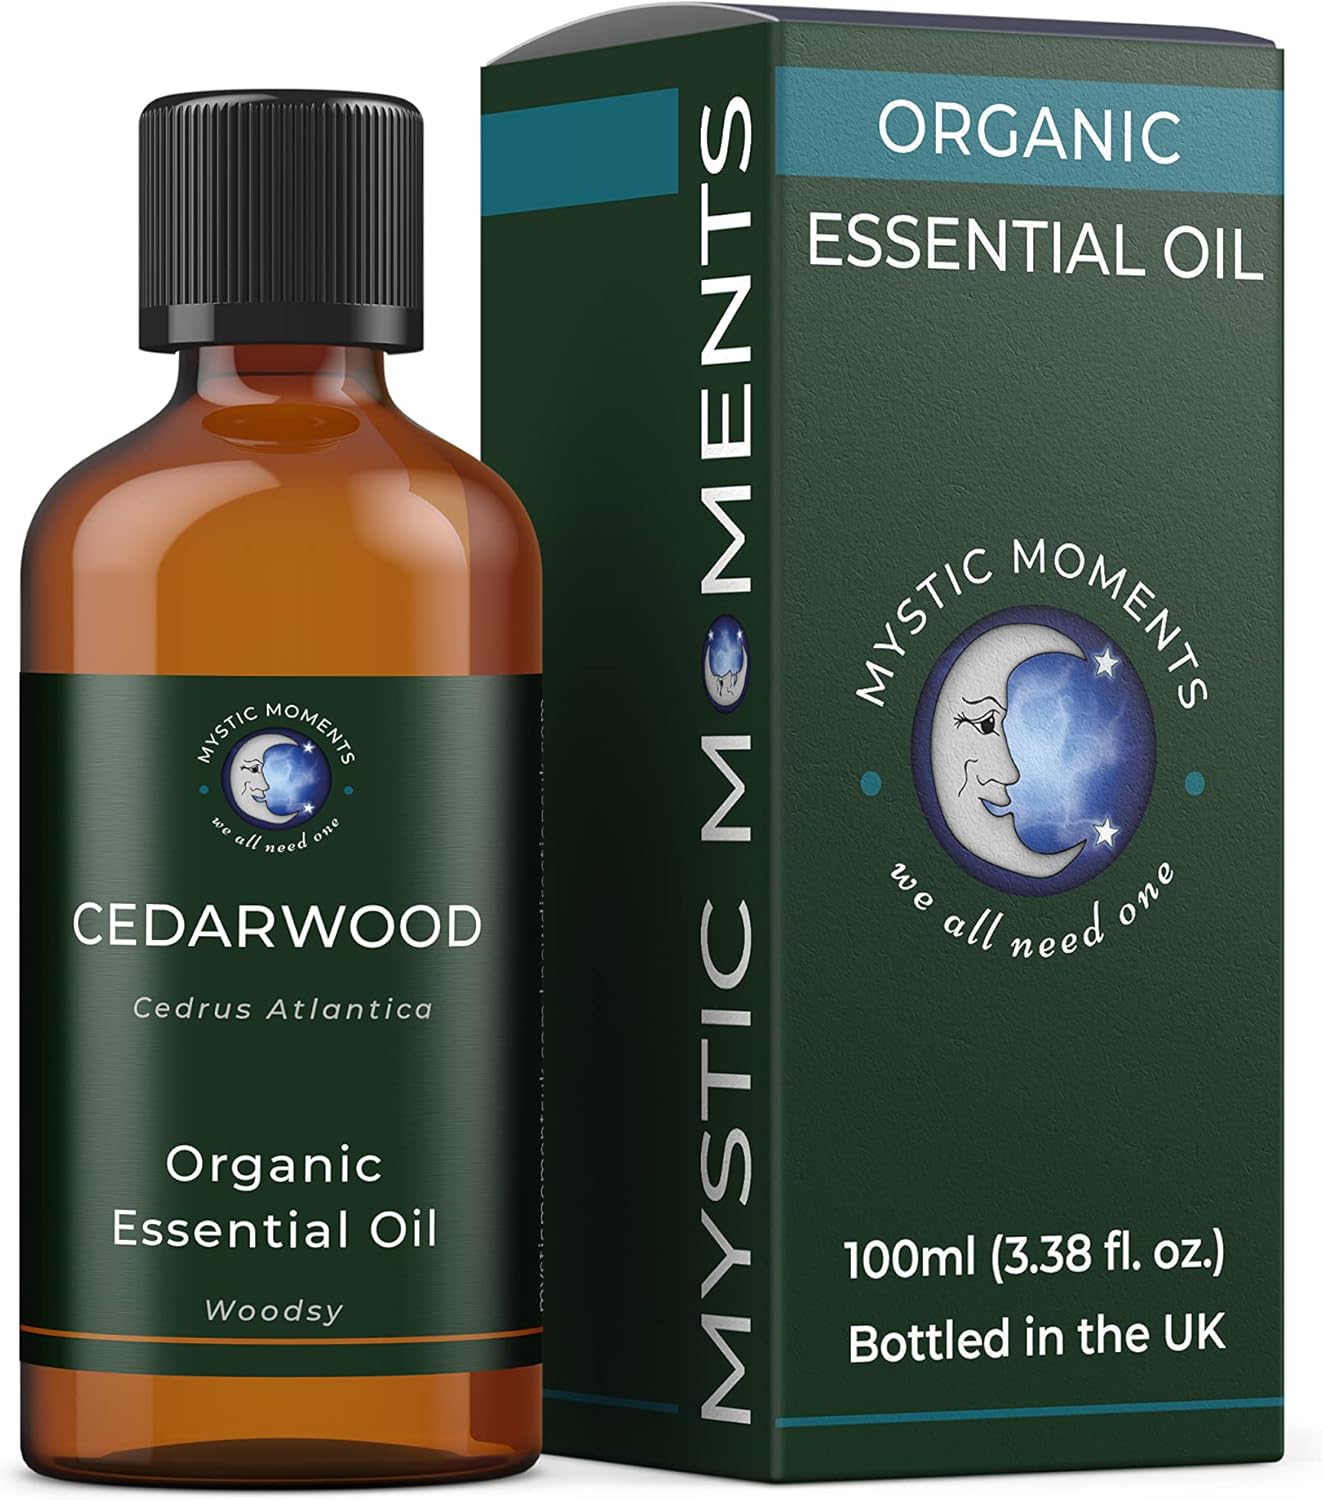 Mystic Moments | Organic Cedarwood Essential Oil 100ml - Pure & Natural oil for Diffusers, Aromatherapy & Massage Blends Vegan GMO Free